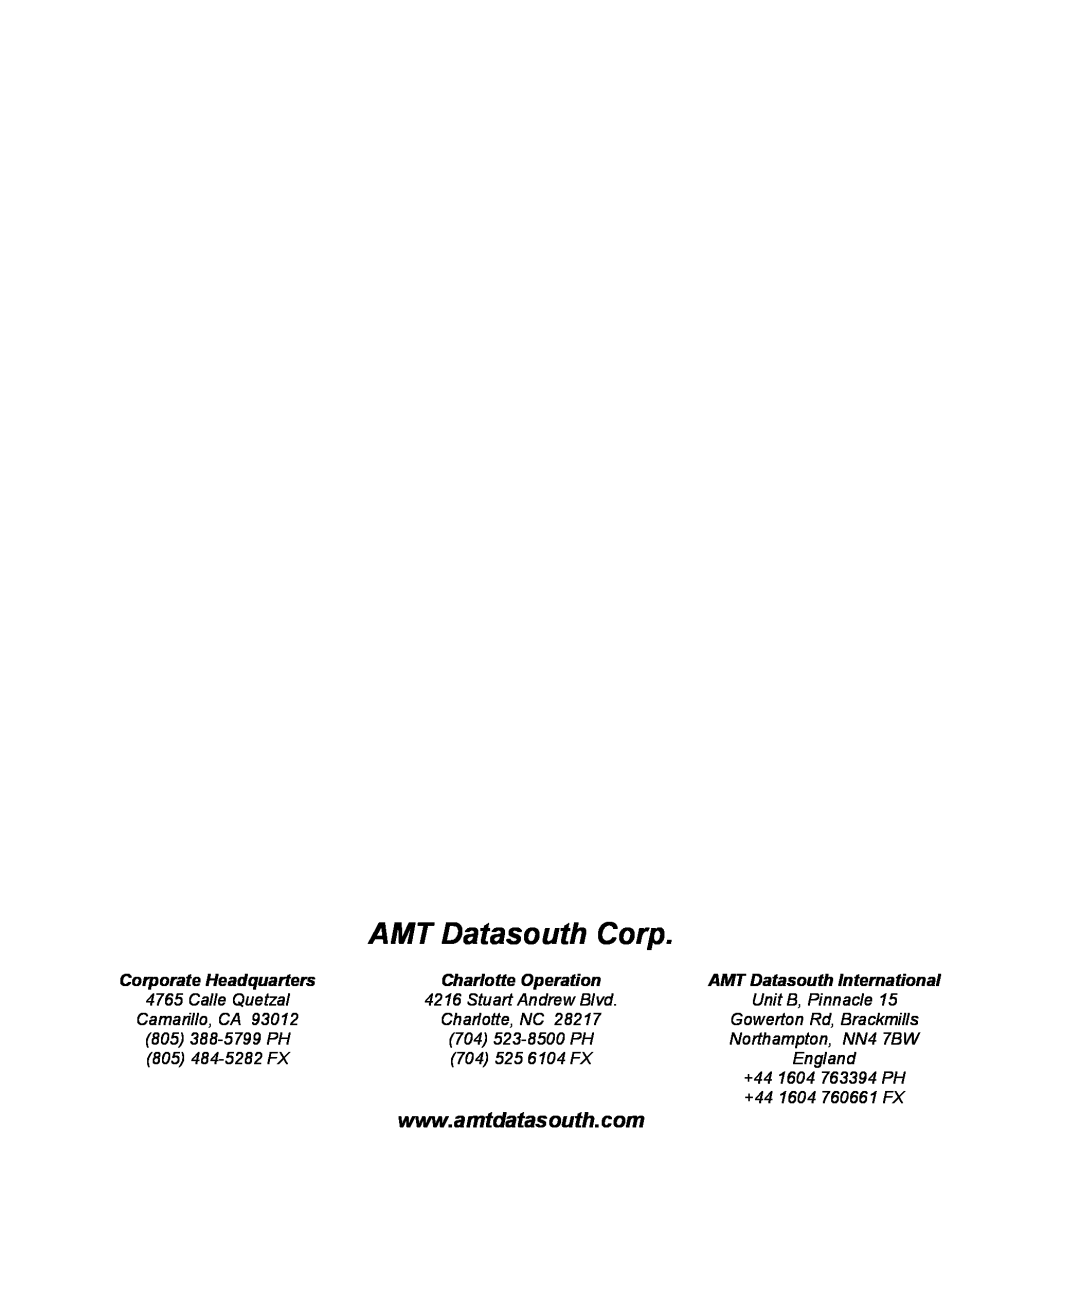 AMT Datasouth 400 manual AMT Datasouth Corp, Charlotte, NC, 704 525, Corporate Headquarters, Charlotte Operation 